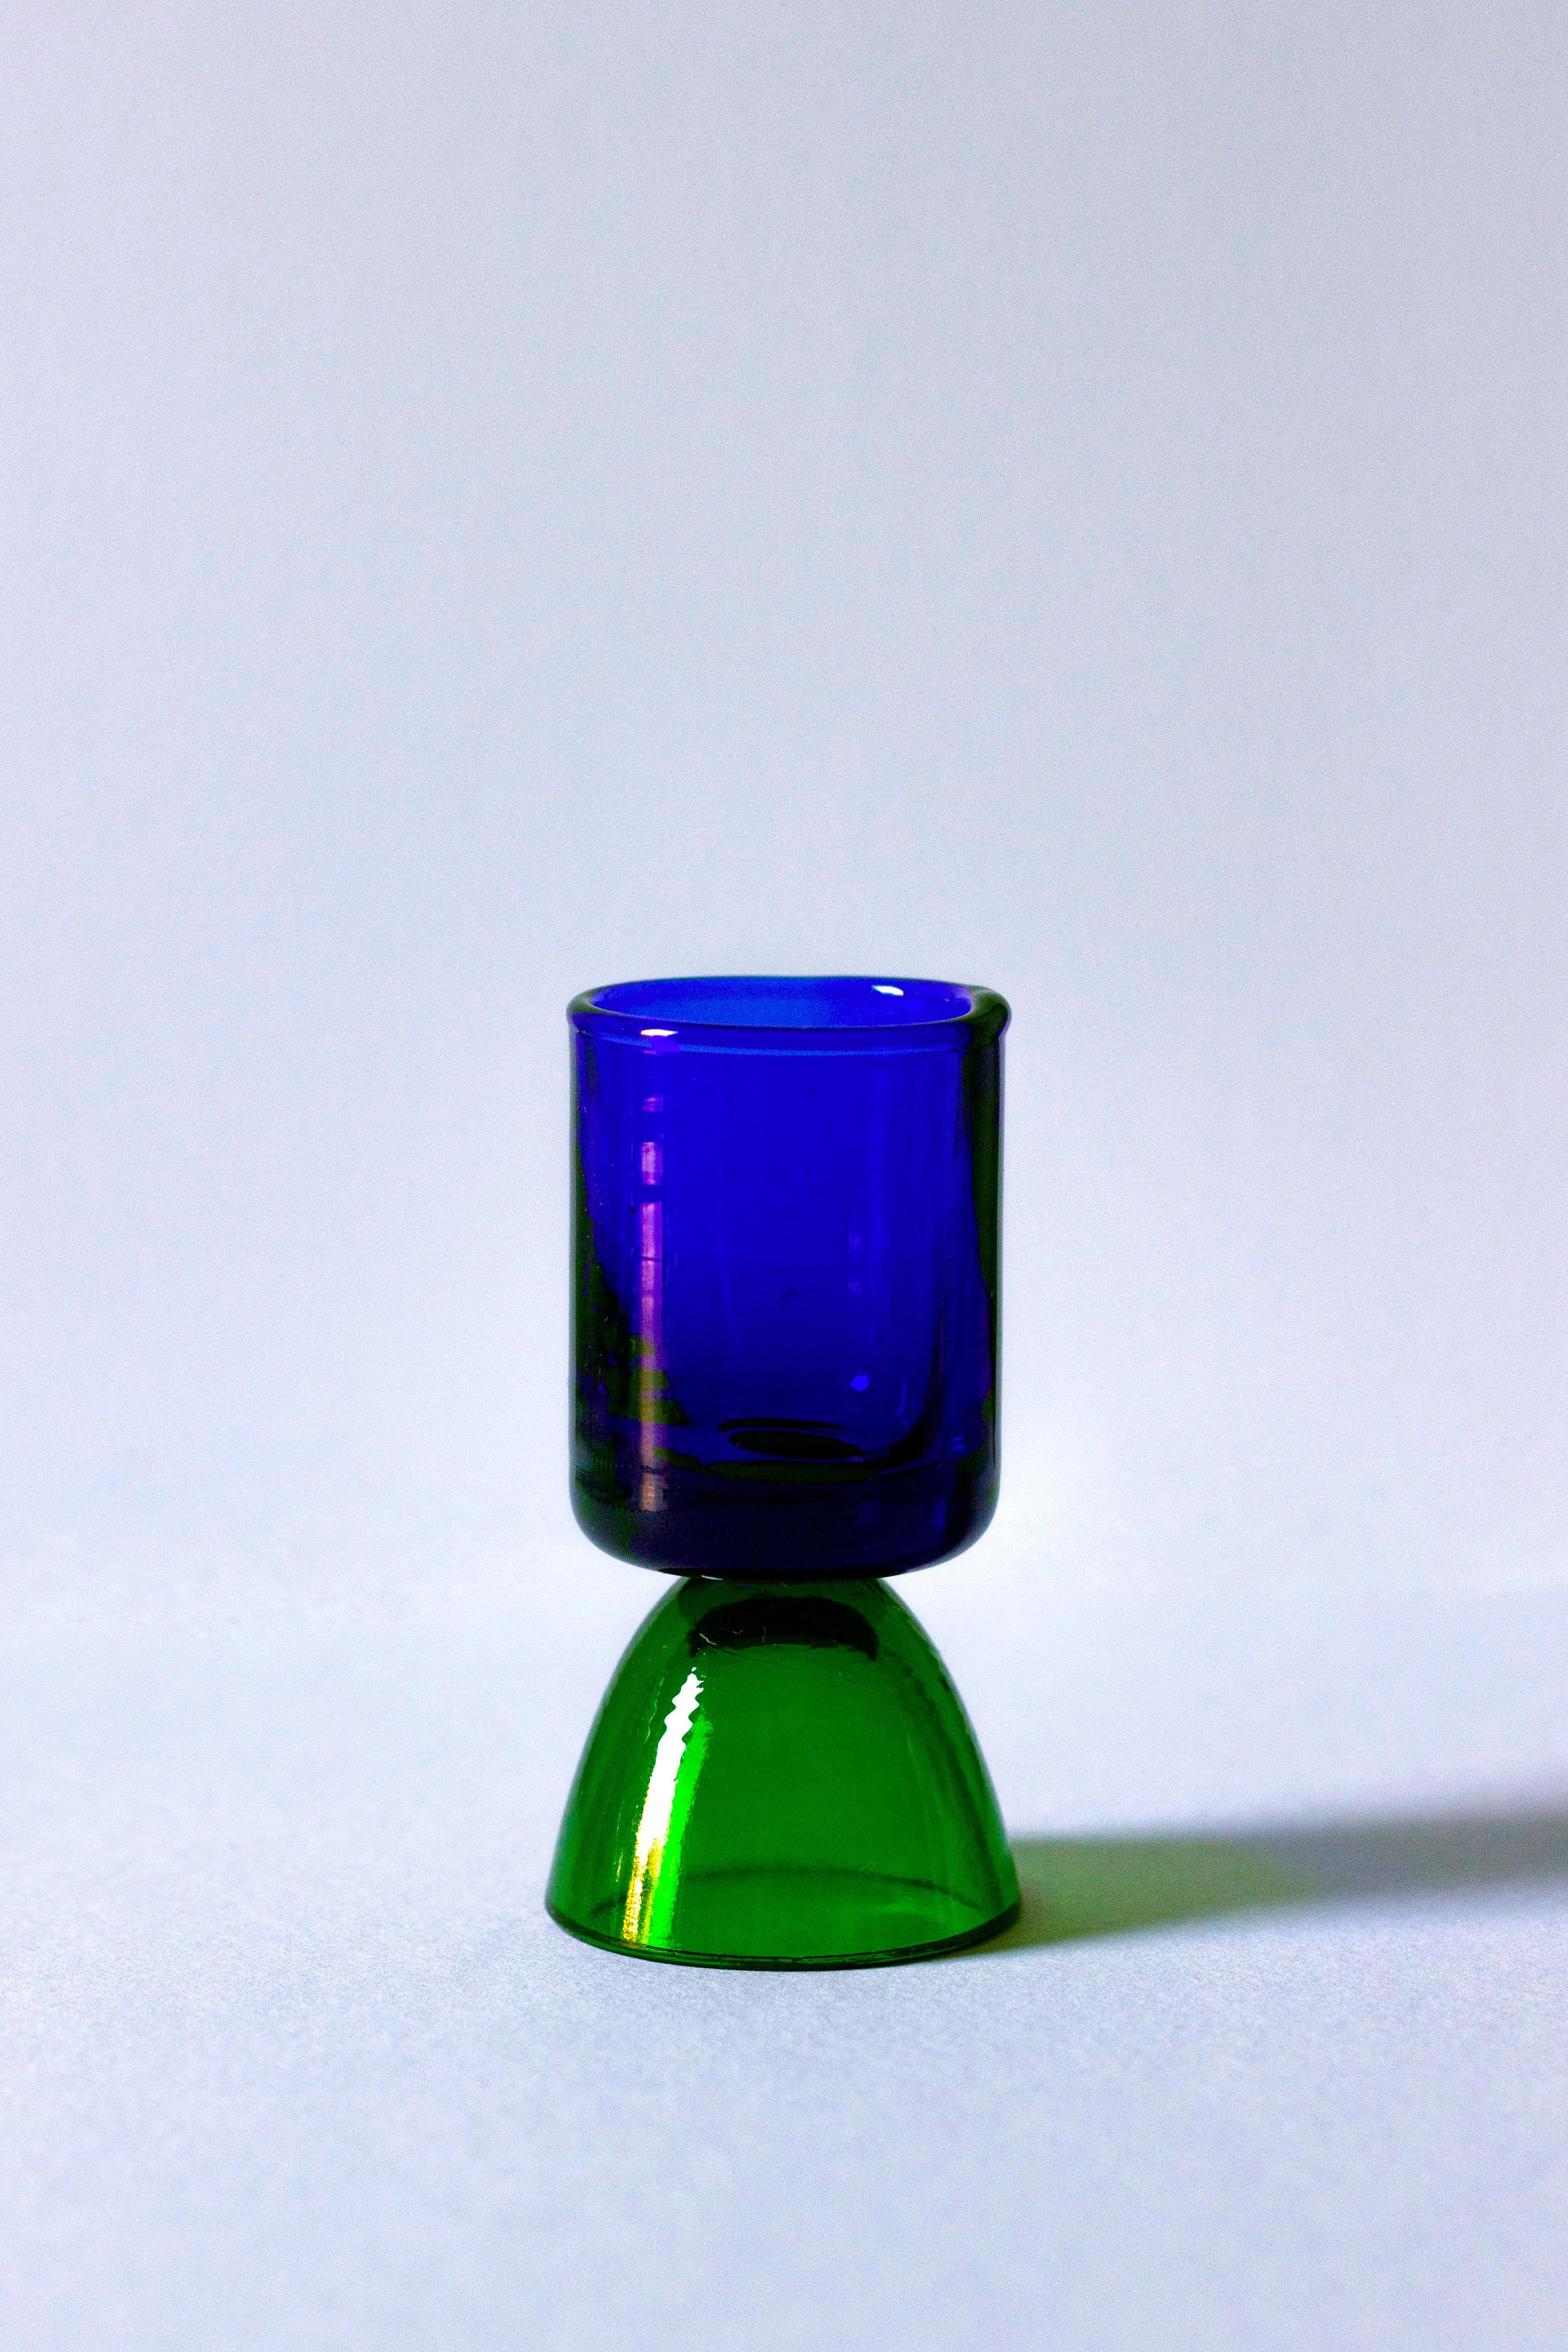 Enjoy a shot with this tequila glass, handcrafted in tuscany by skilled artisans. Ideal for savoring tequila, mezcal, or other fine spirits, this glass from the wonder crystals collection comes in a blue/green adding sophistication to your table